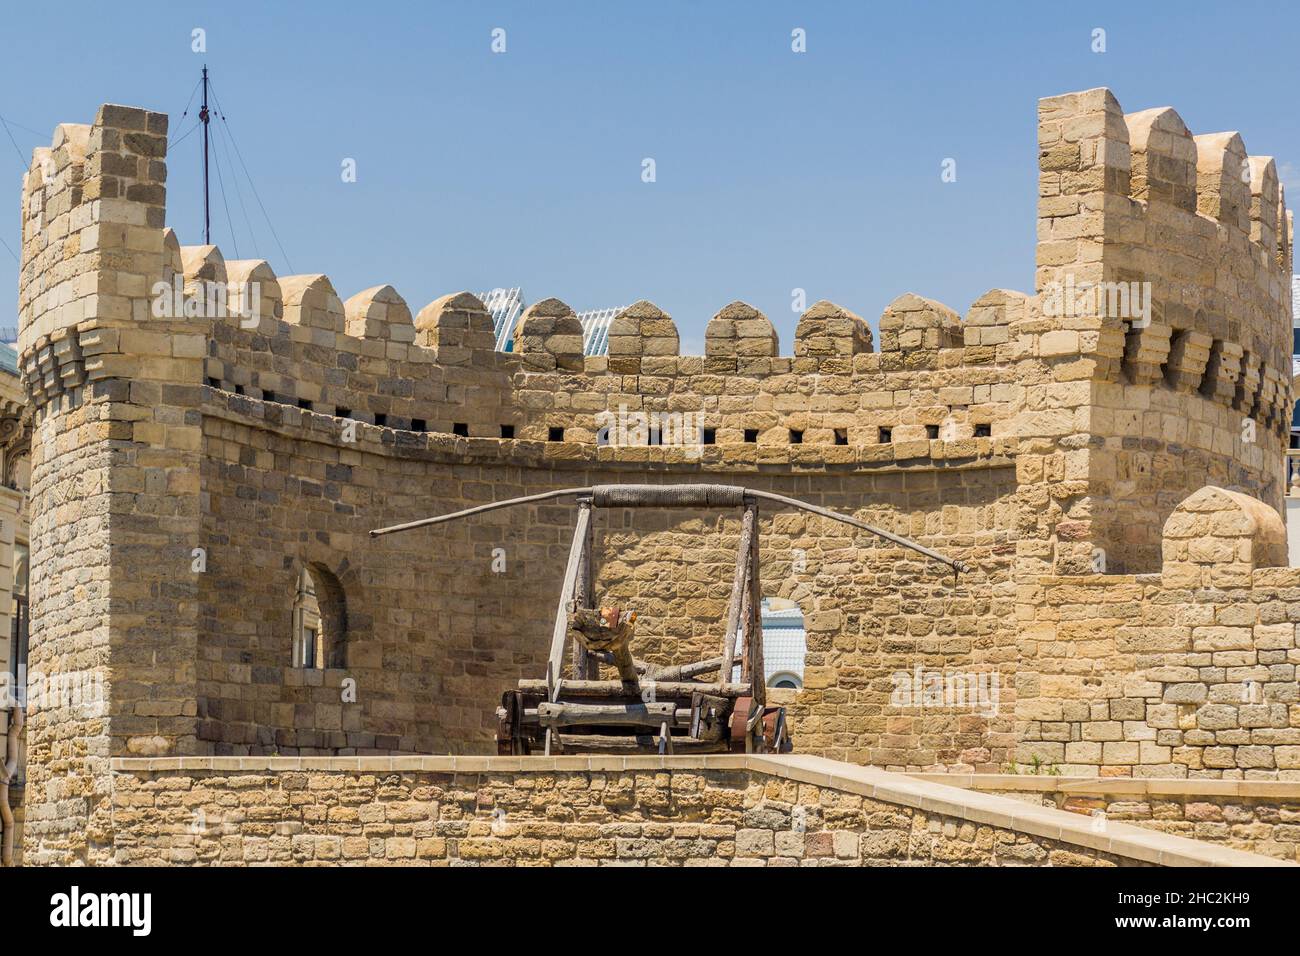 Catapult at the fortification walls of the old town of Baku, Azerbaijan Stock Photo